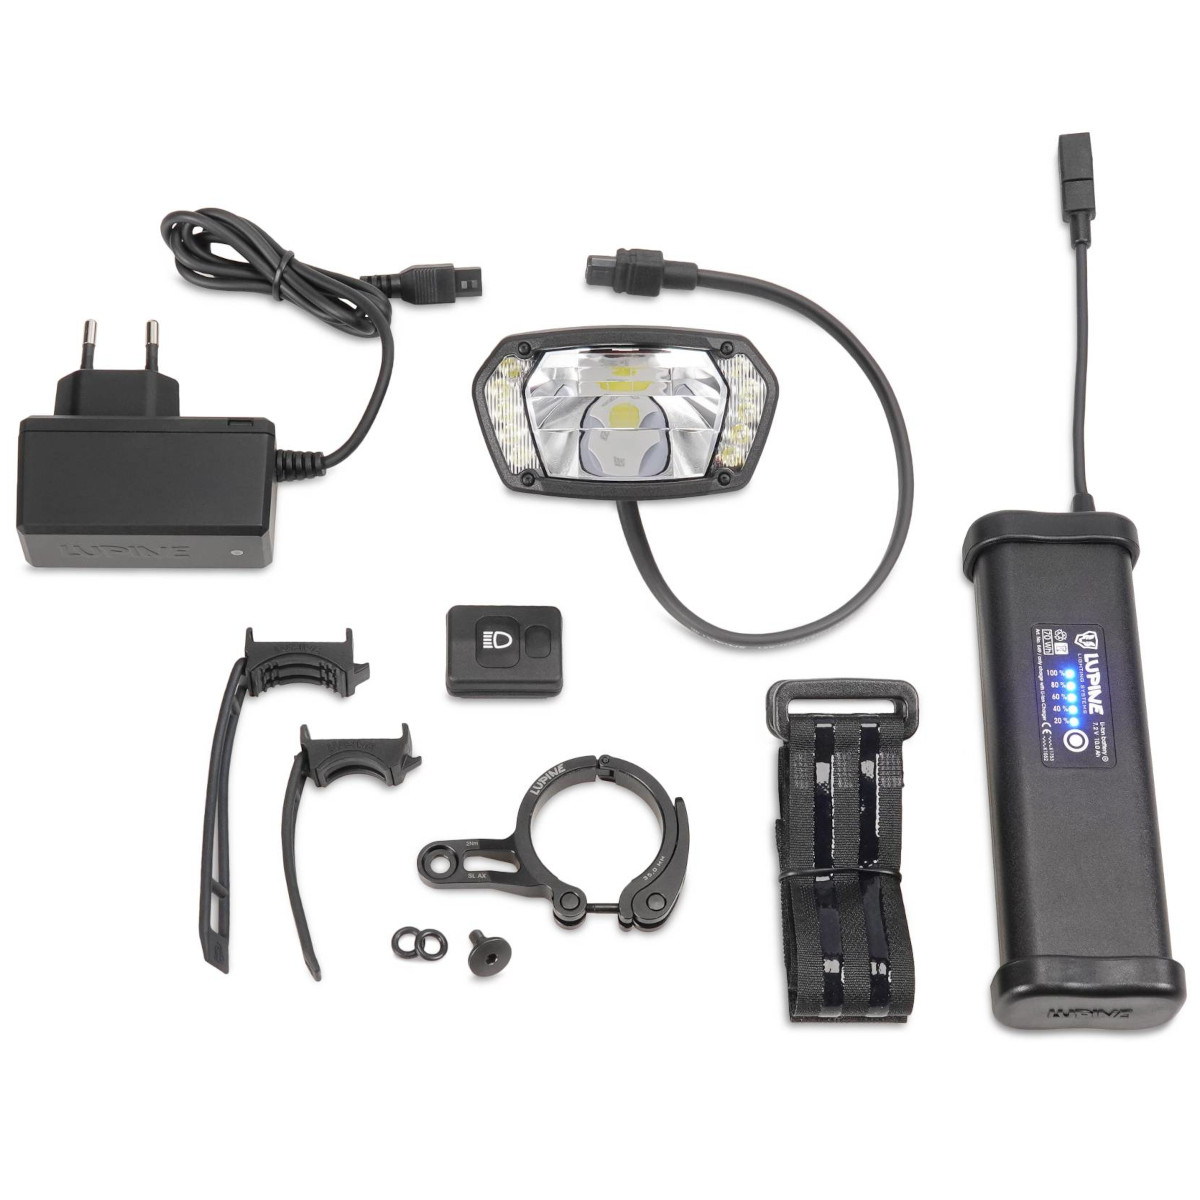 Picture of Lupine SL AX Front Light - 10.0 Ah SmartCore Battery